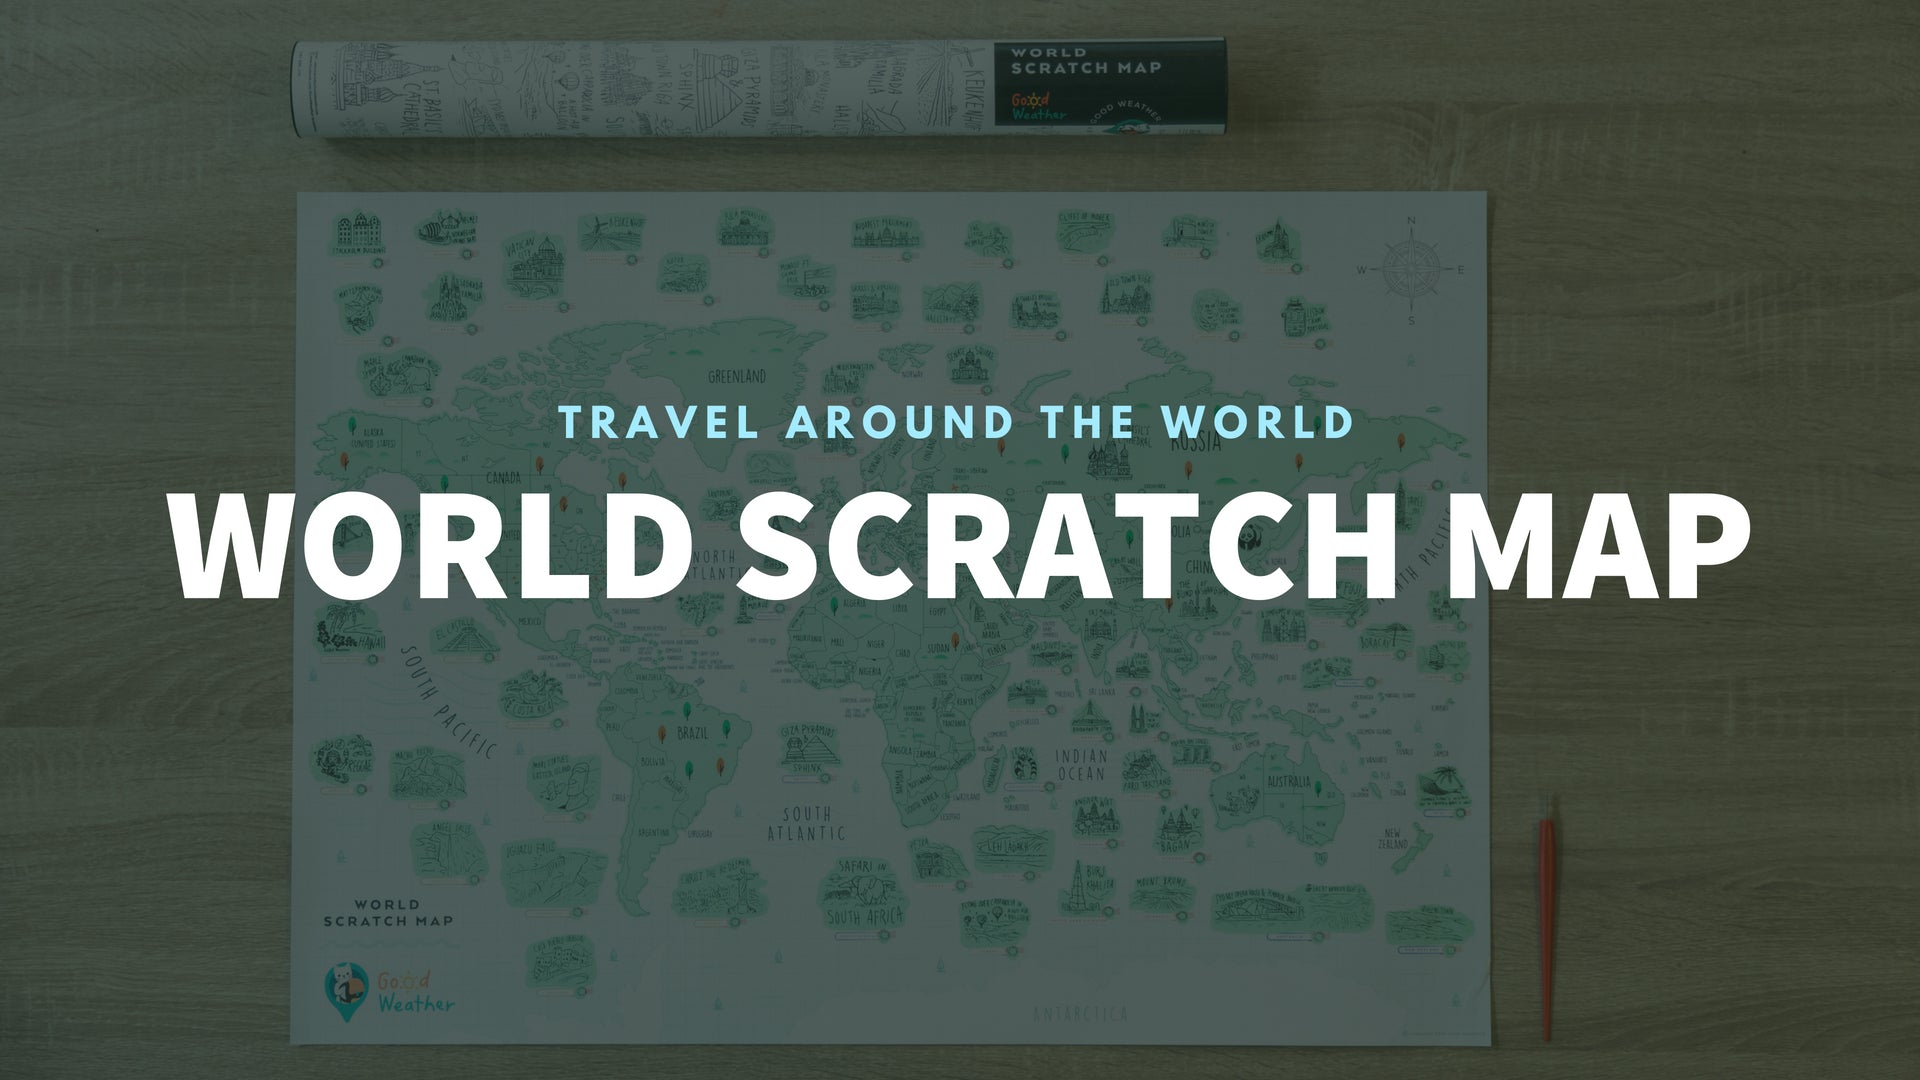 GadgetiCloud Good Weather World Scratch Travel Map Travel around the World deluxe luckies world travel map with pins europe uk rosegold small personalised Scratch Off Traveling World Map travelization 刮刮地圖 刮刮樂 世界地圖 刮刮世界地圖 banner